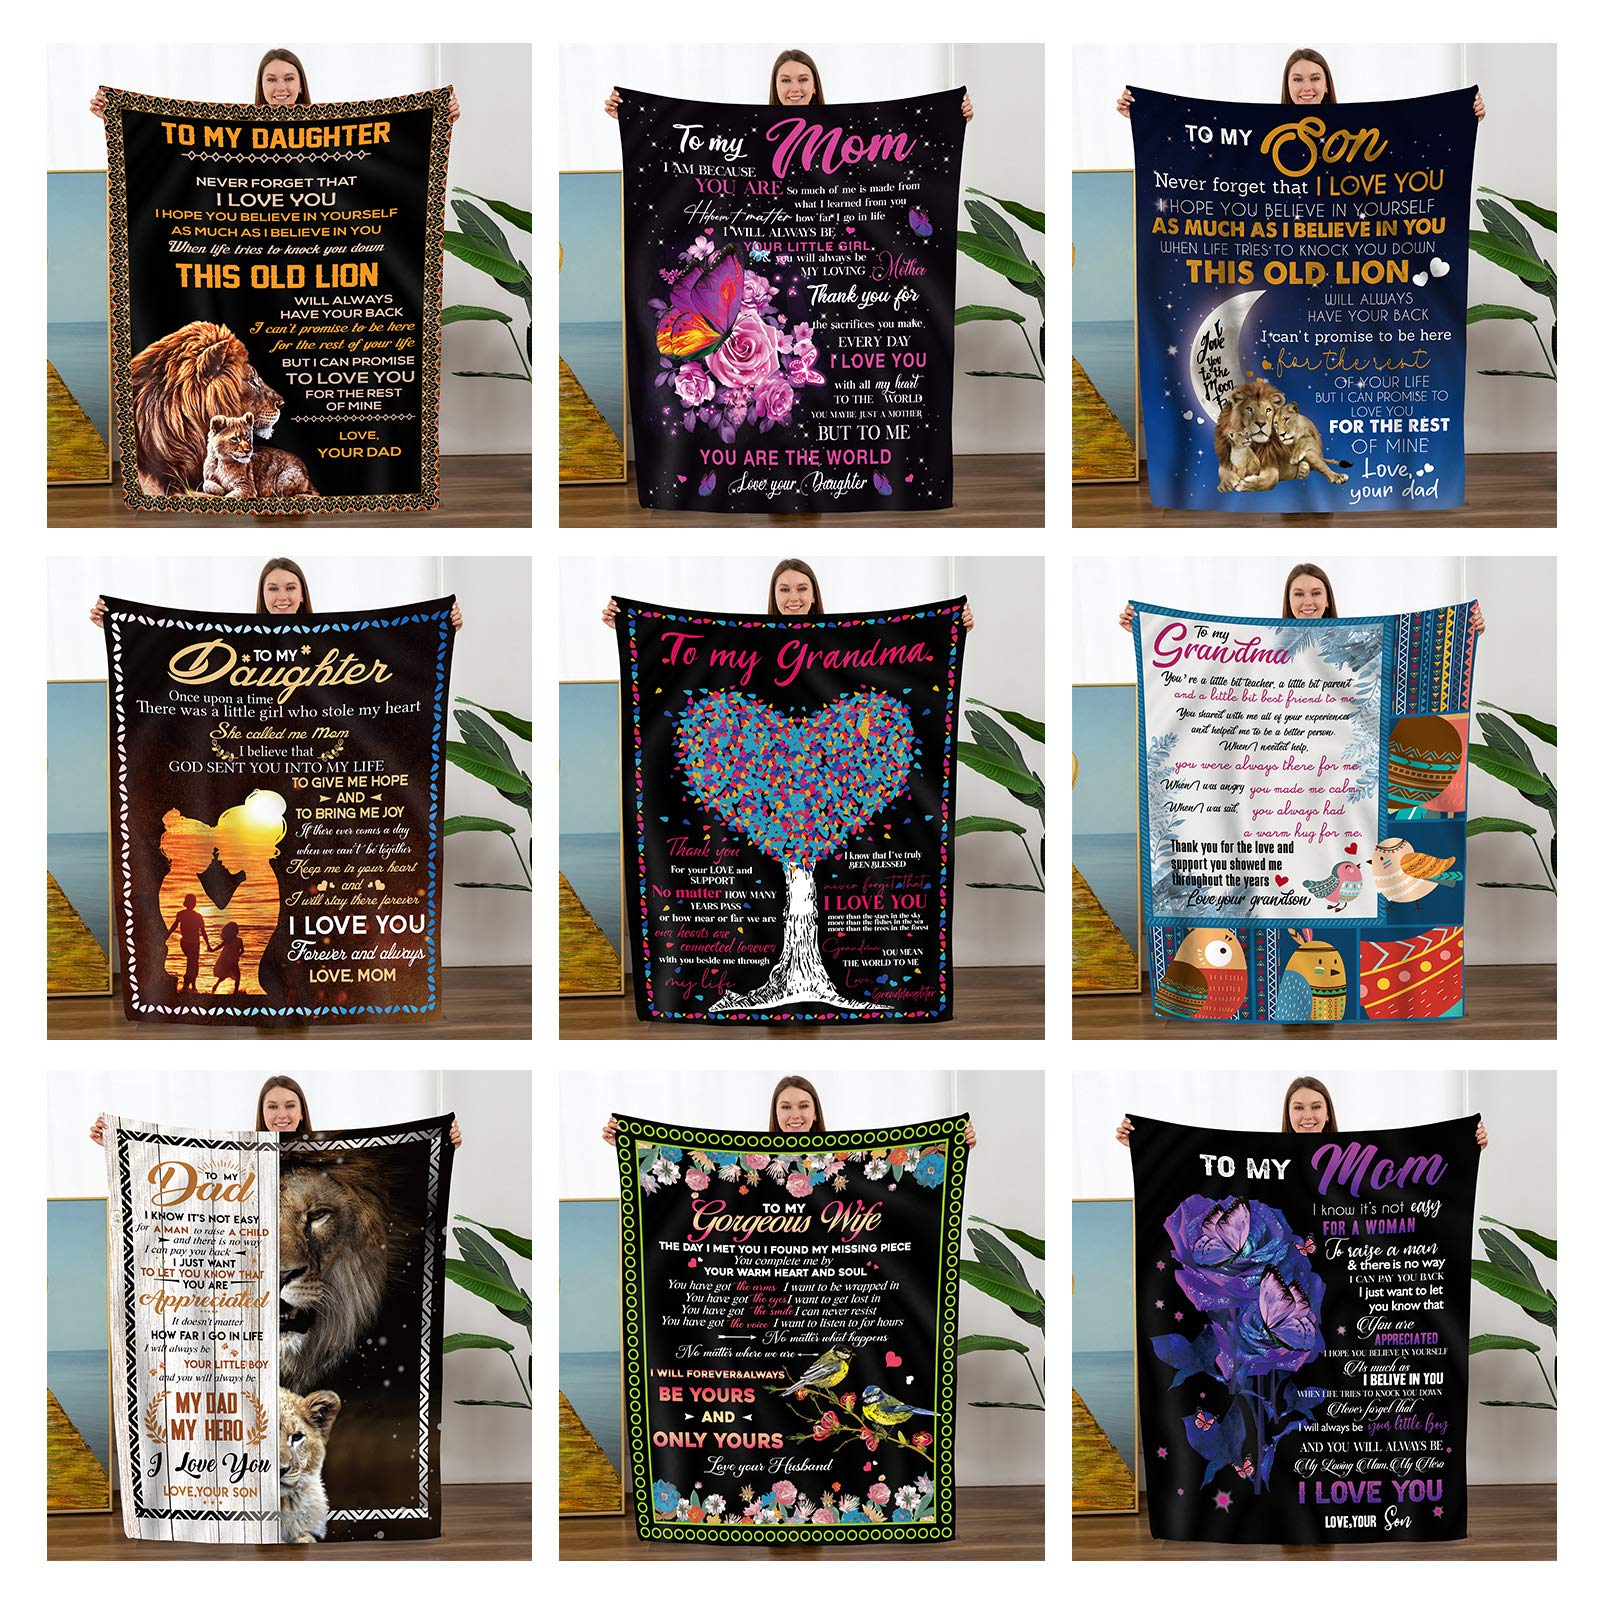 Gifts for Mom Blanket,Birthday Gifts for Mom,Mom Birthday Gifts from  Daughter Son,Best Mom Gift Ideas Presents,for Mom from Daughter,Mom Gifts  from